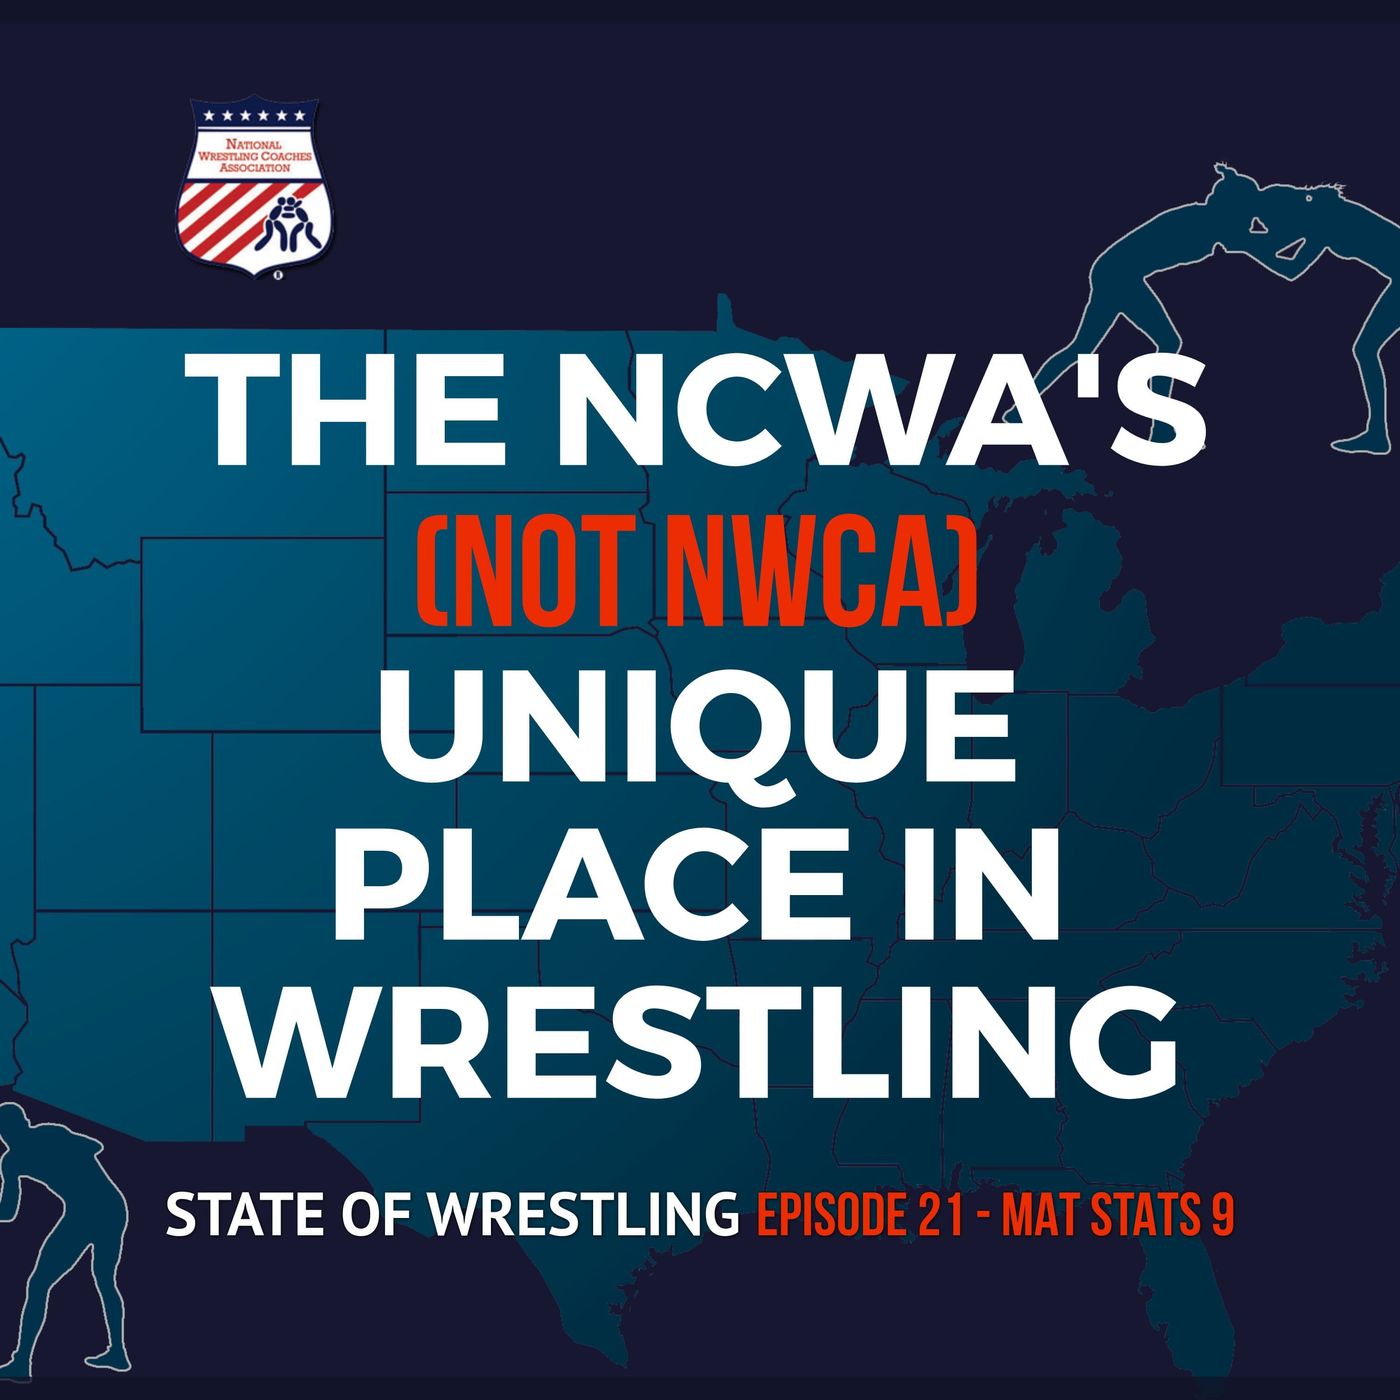 Mat Stats 9: The unique role of the NCWA in college wrestling - SOW21